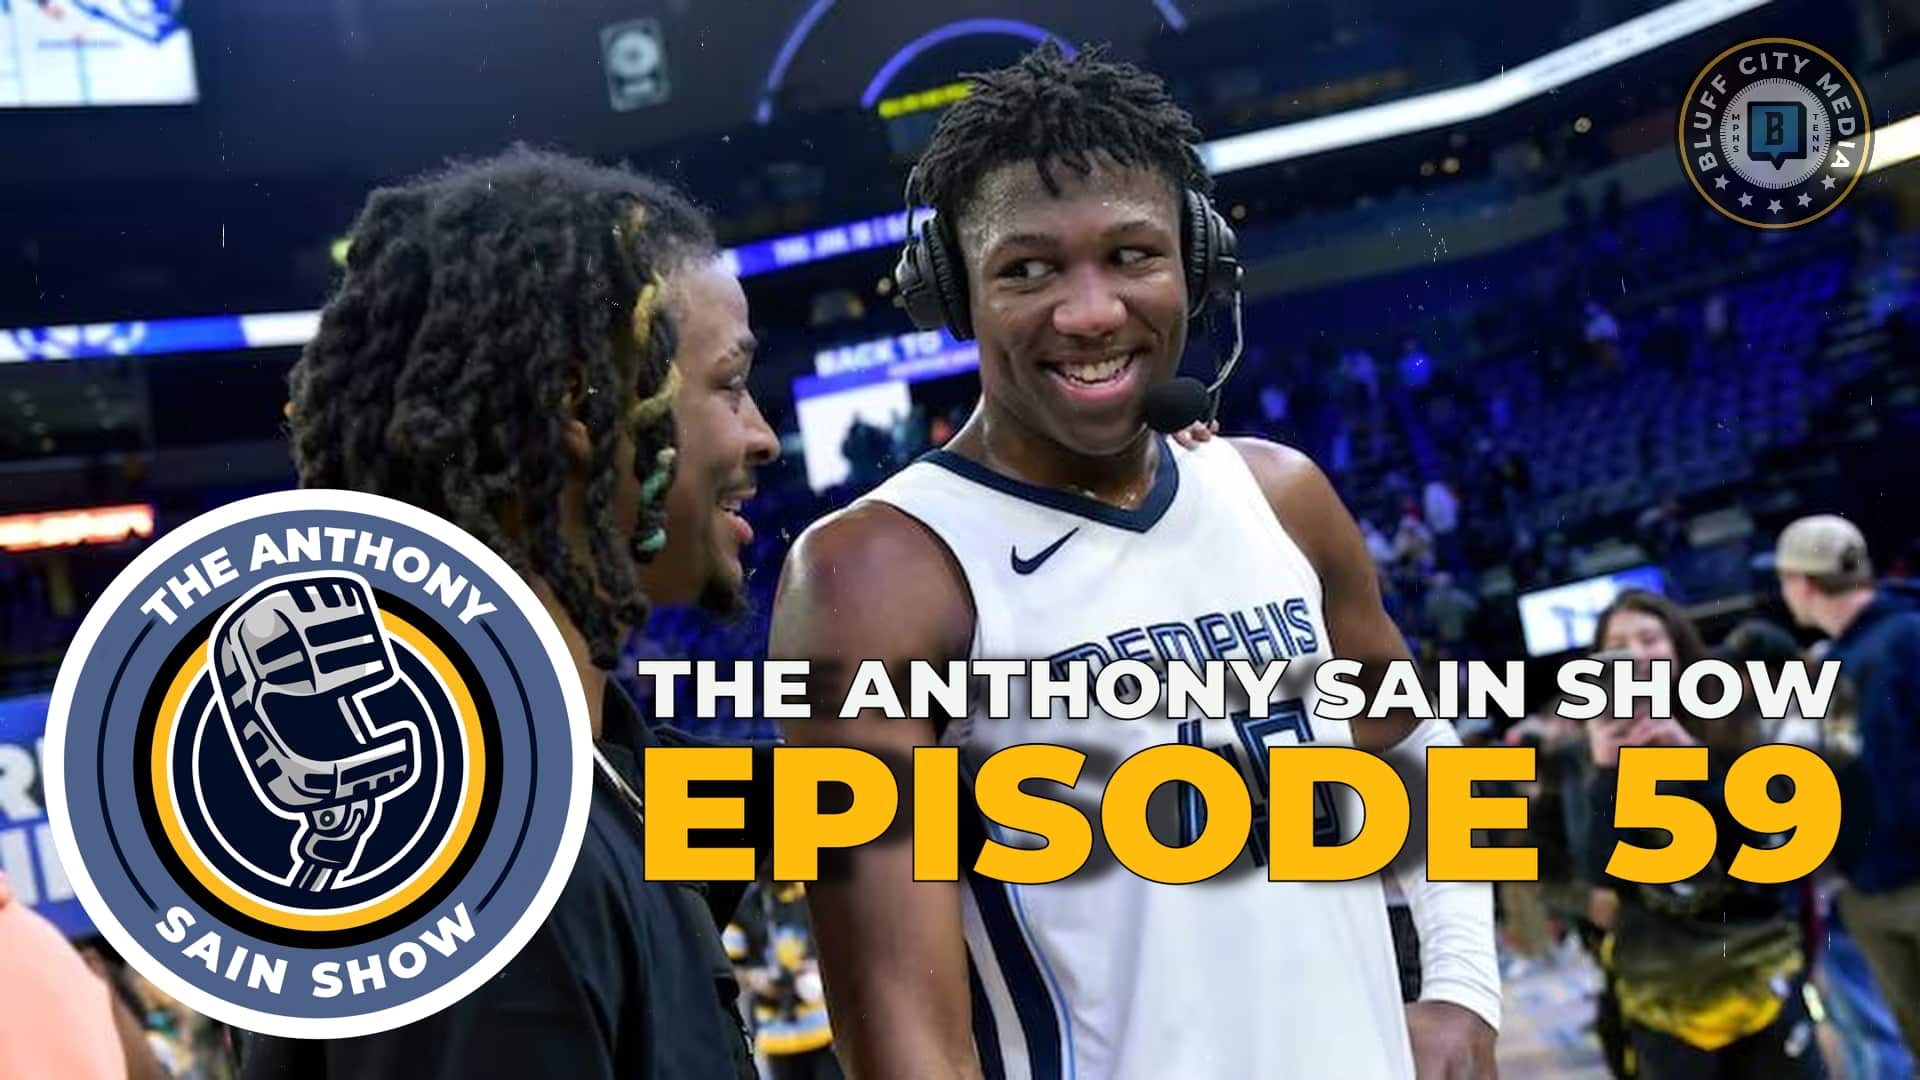 Featured image for “The Anthony Sain Show Ep 59: Vince and GG’s Emergence; Penny Is Wild”